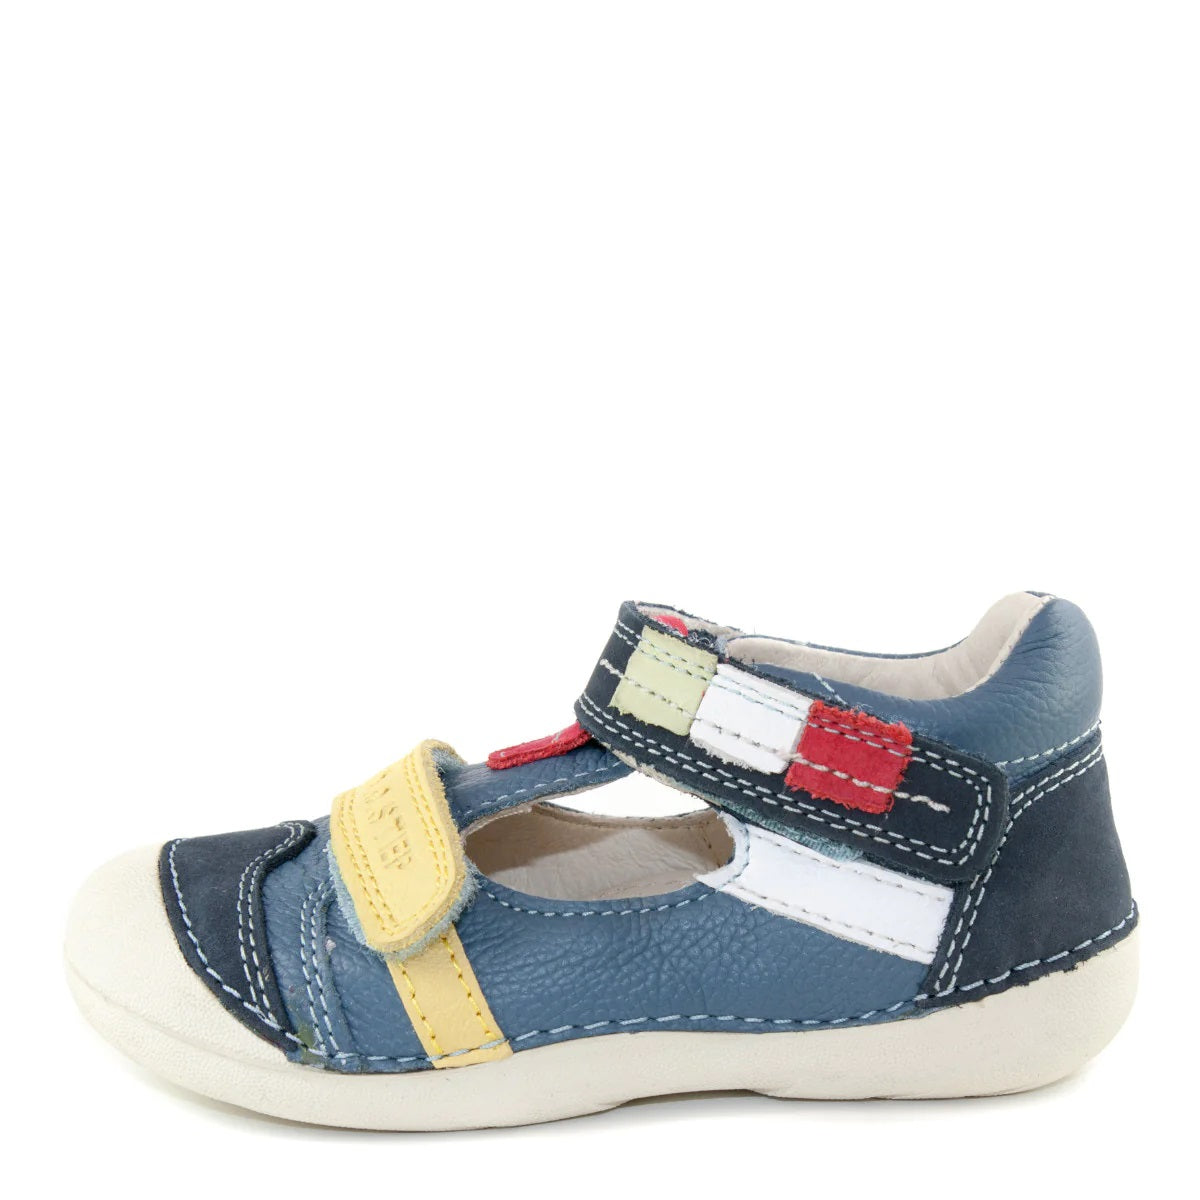 D.D. Step Toddler Double Strap Boy Sandals/Open Shoes Blue With Colourful Details - Supportive Leather From Europe Kids Orthopedic - shoekid.ca